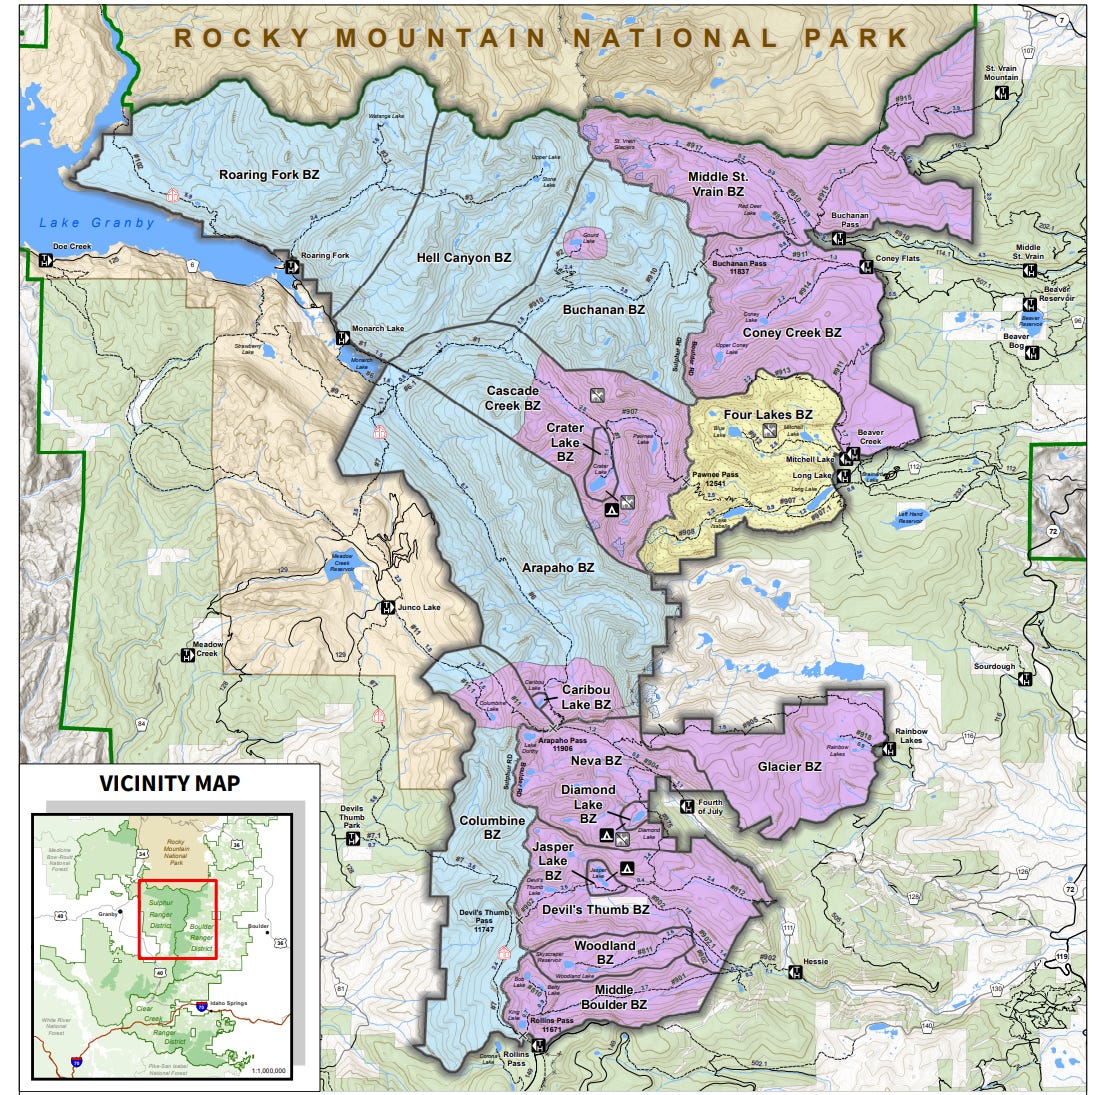 A map of the many regions within the Indian Peaks Wilderness